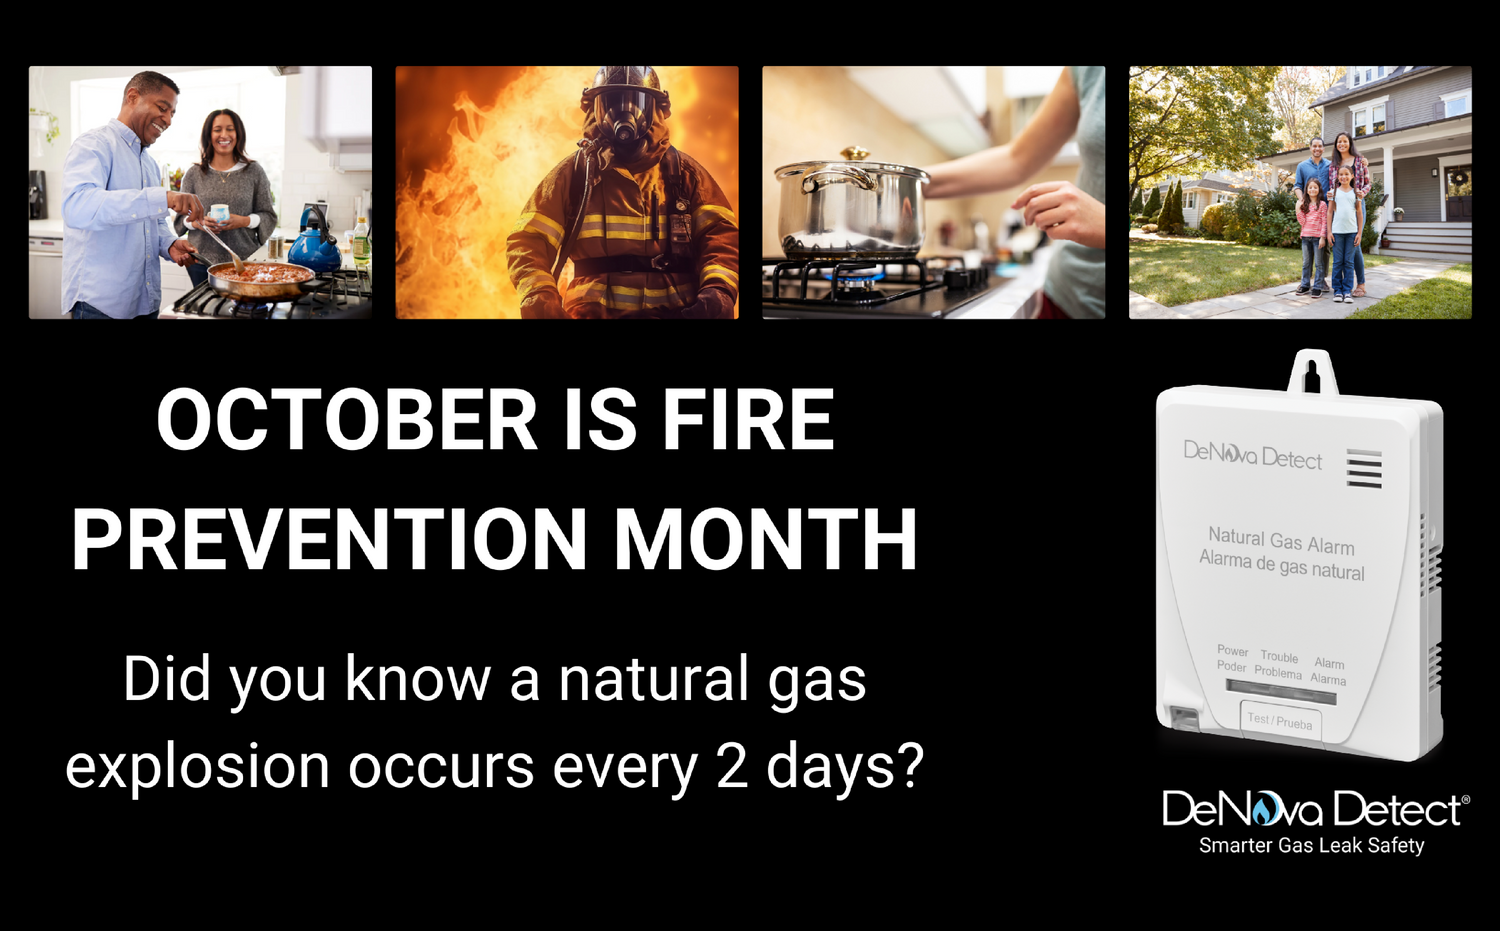 DeNova Detect Teams Up with Local Fire Departments and Lawmakers During National Fire Prevention Week to Promote Natural Gas Safety Awareness